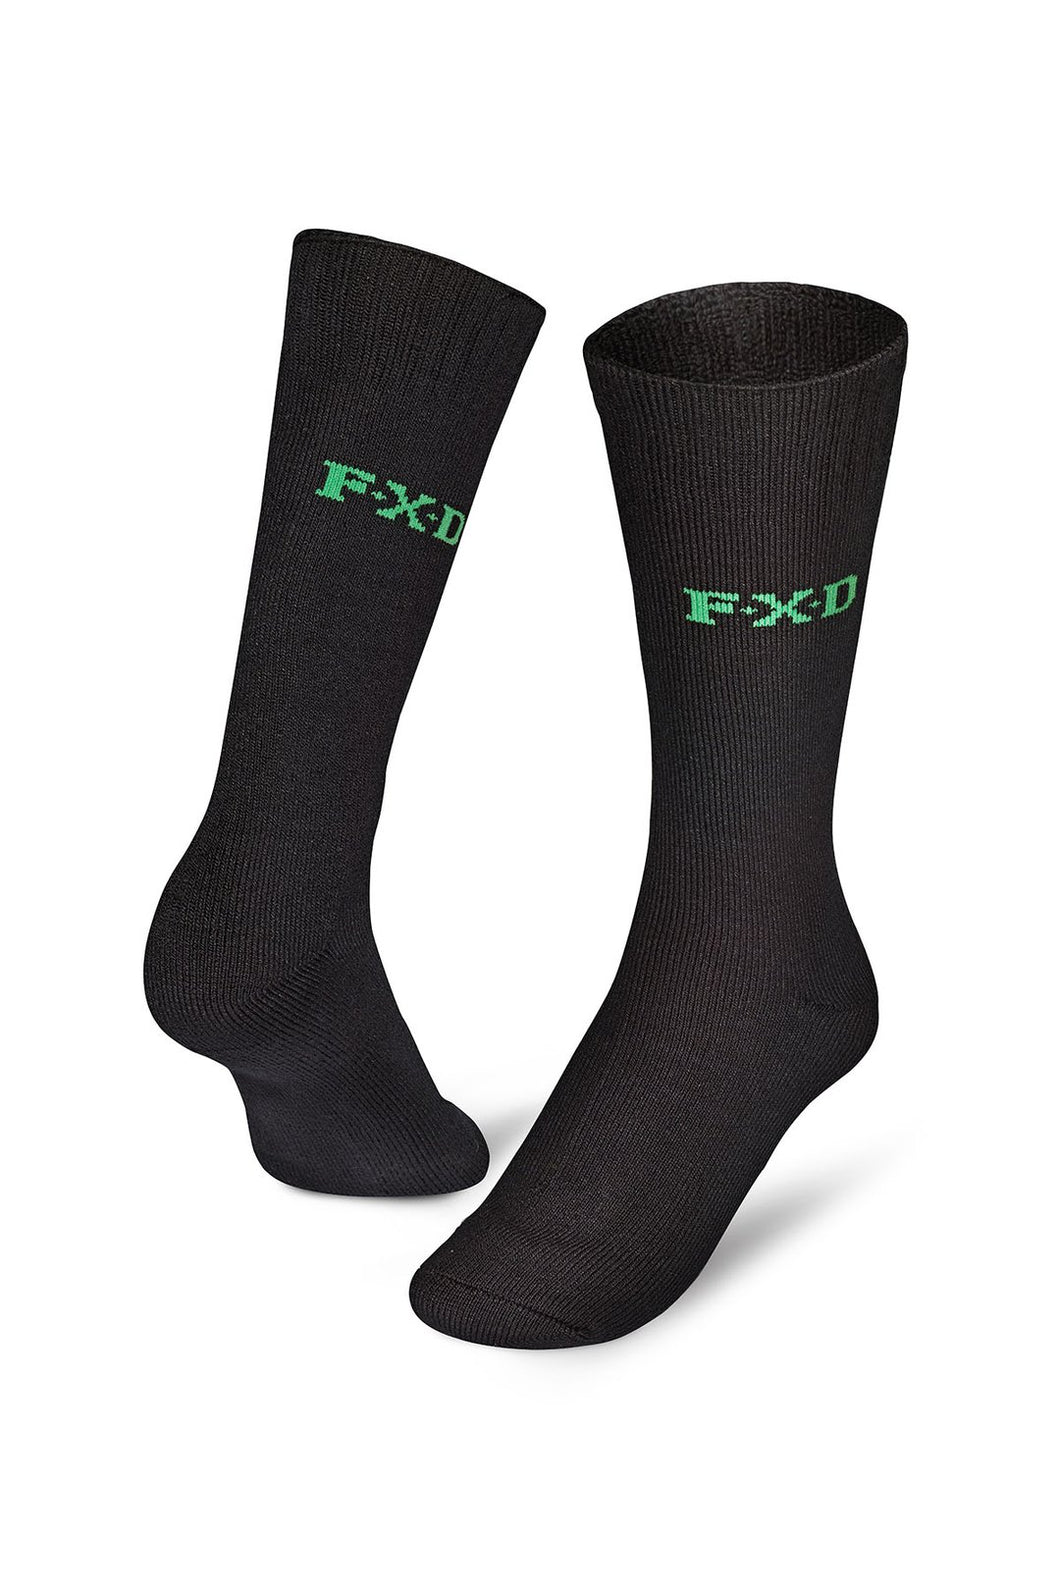 FXD SK-5 Bamboo Wool Sock - 2 Pack